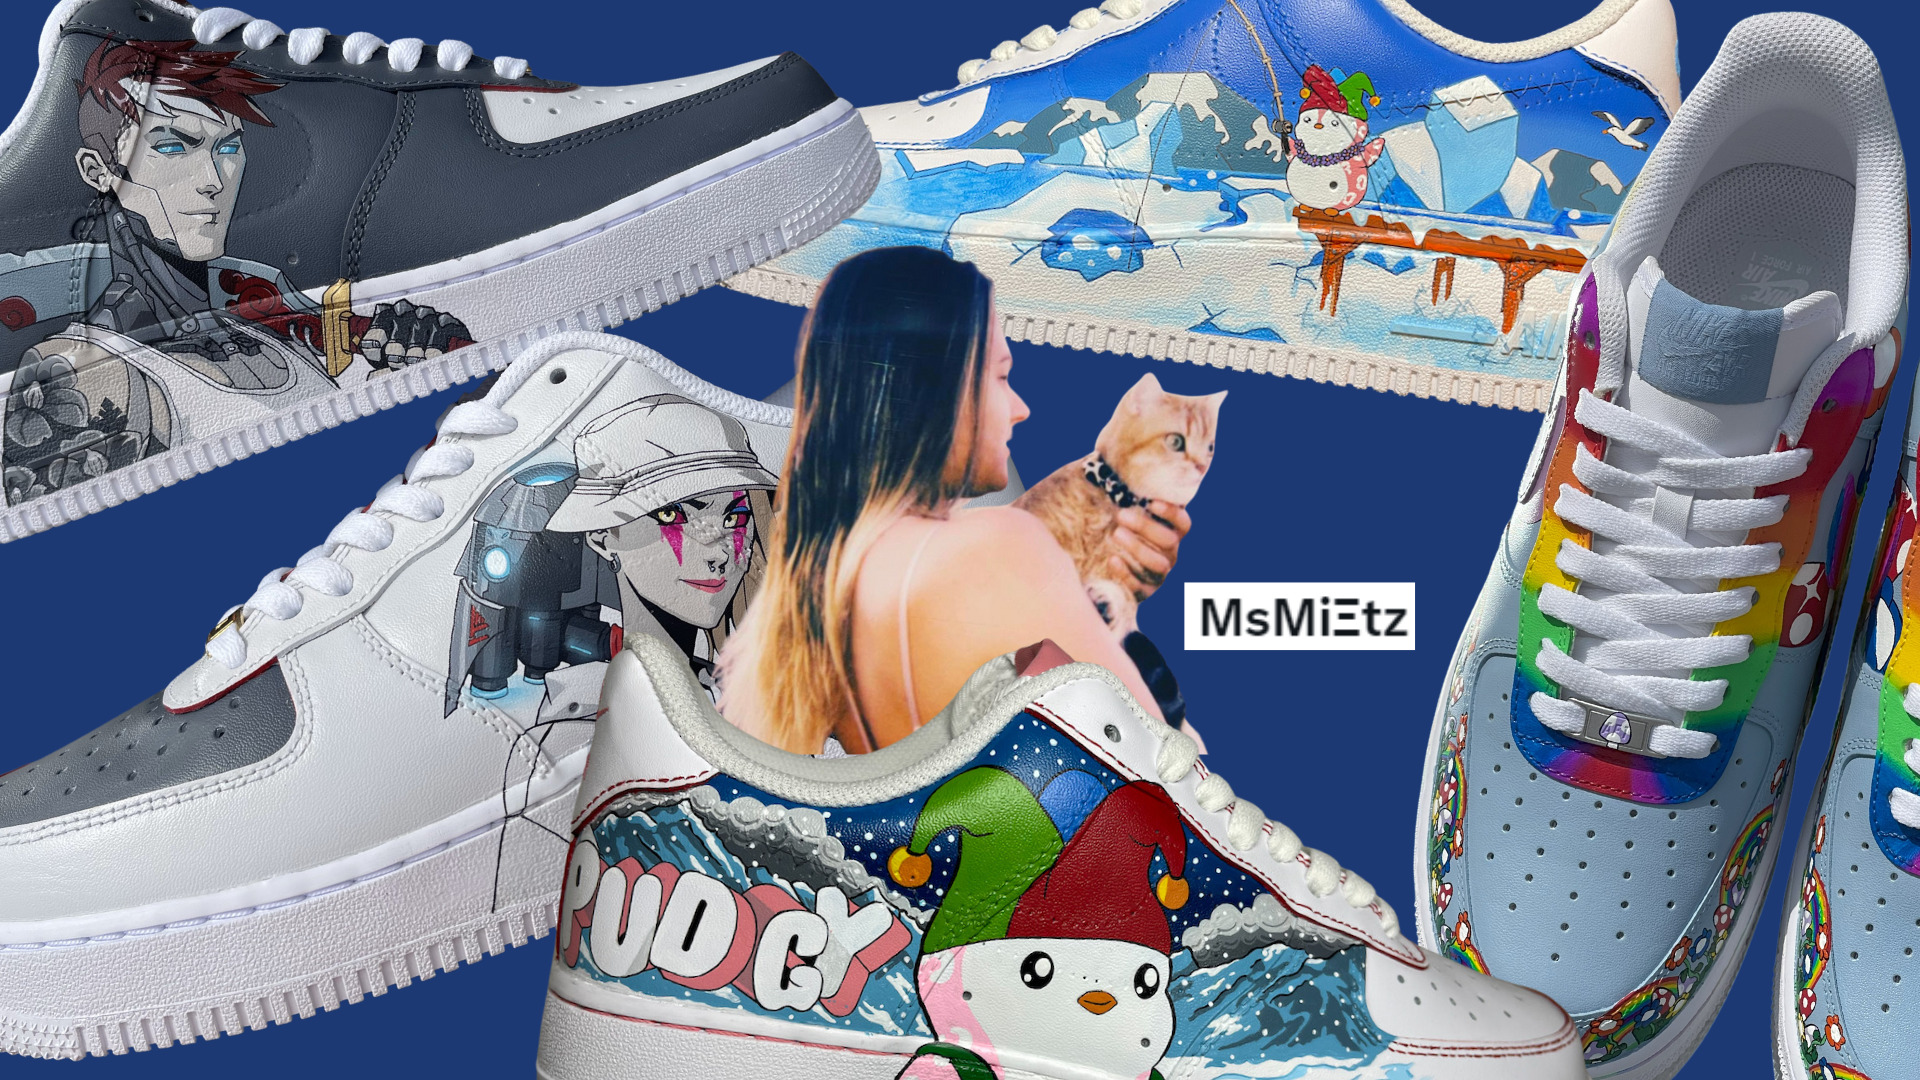 Ms Mietz: The jet-setting artist turning sneakers into digital canvases